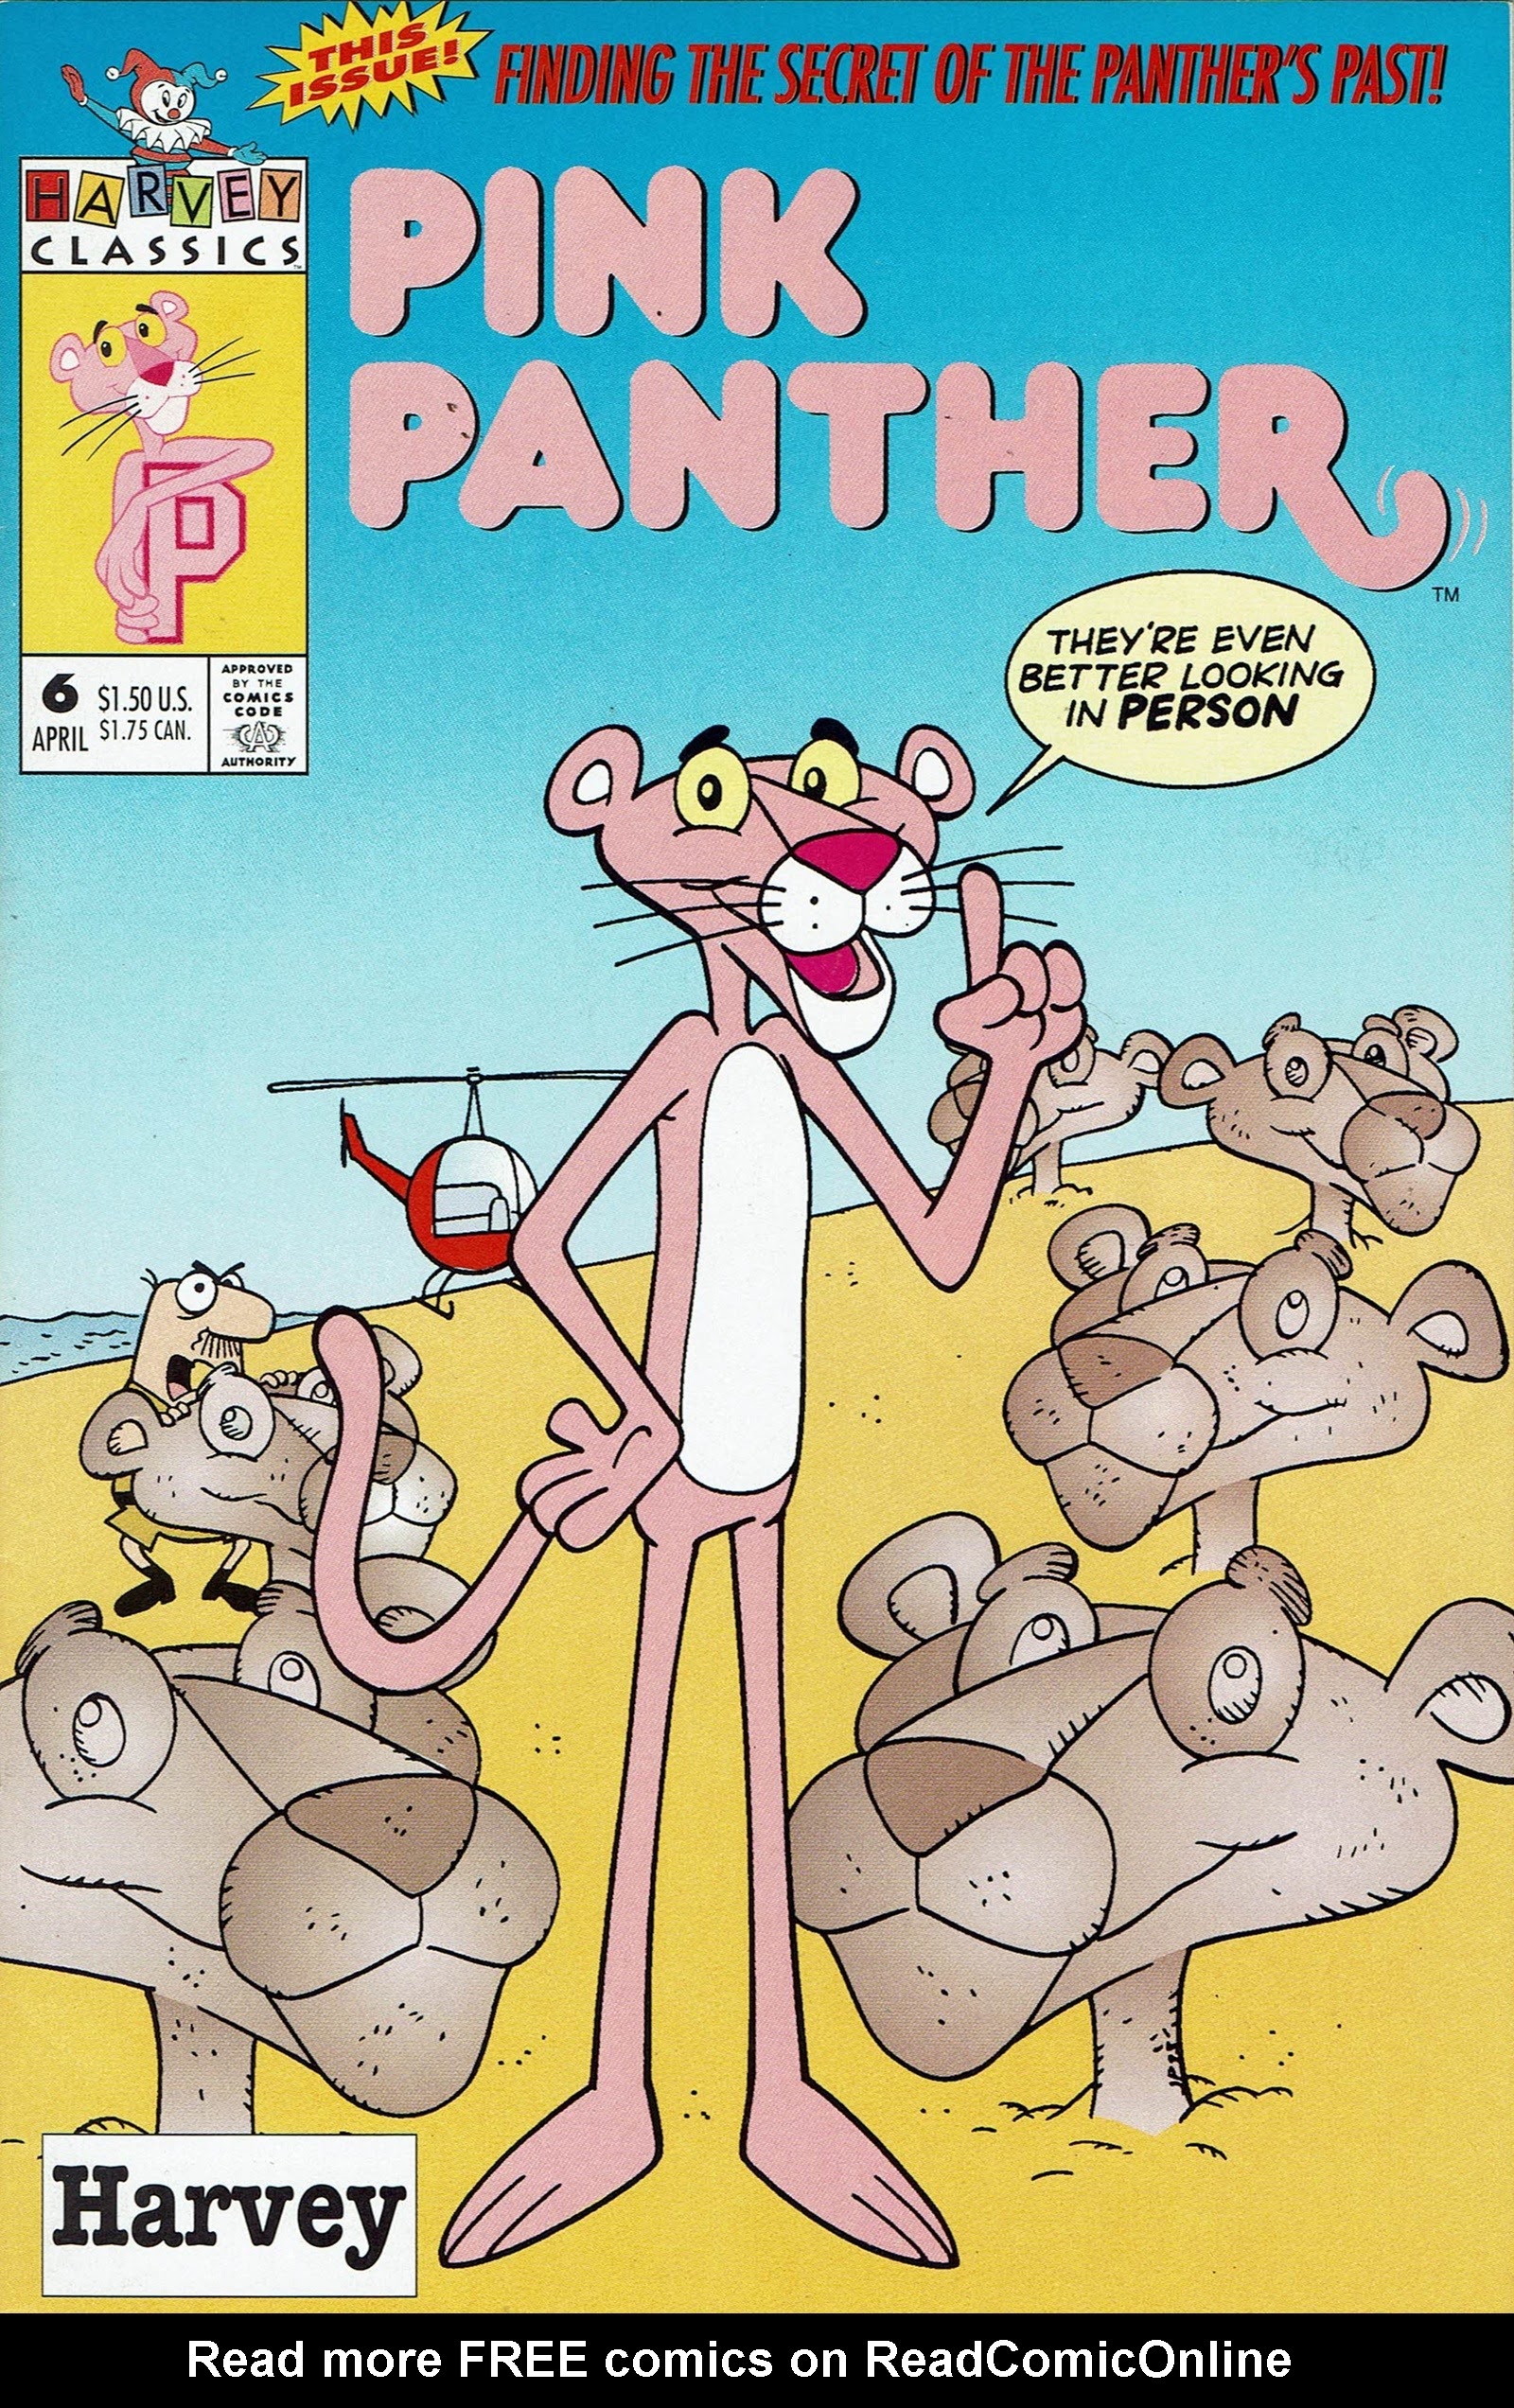 Read online Pink Panther comic -  Issue #6 - 1